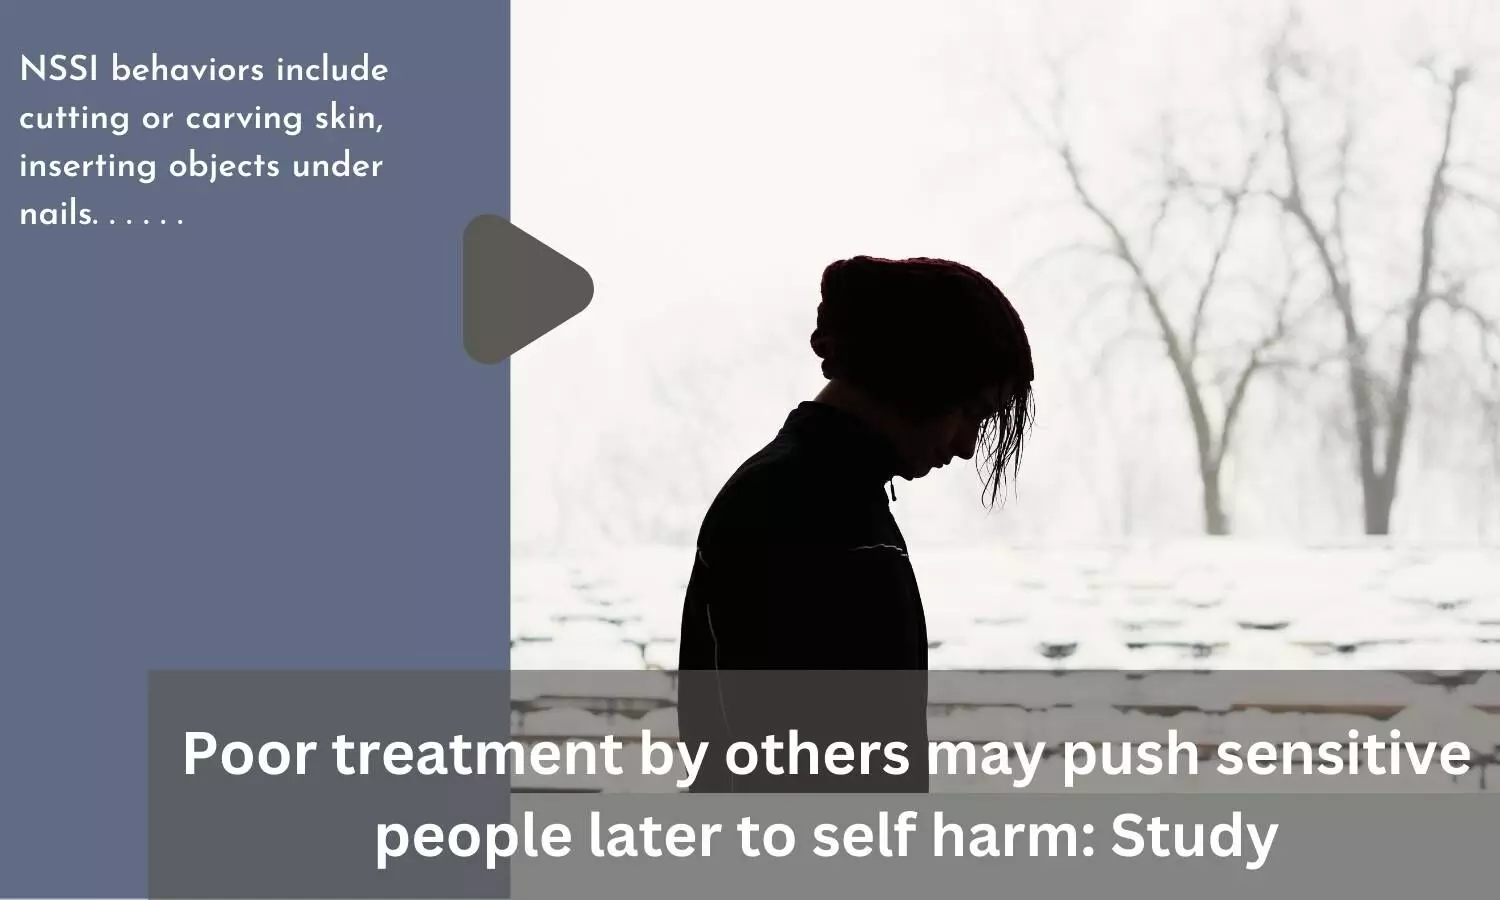 Poor treatment by others may push sensitive people later to self harm: Study